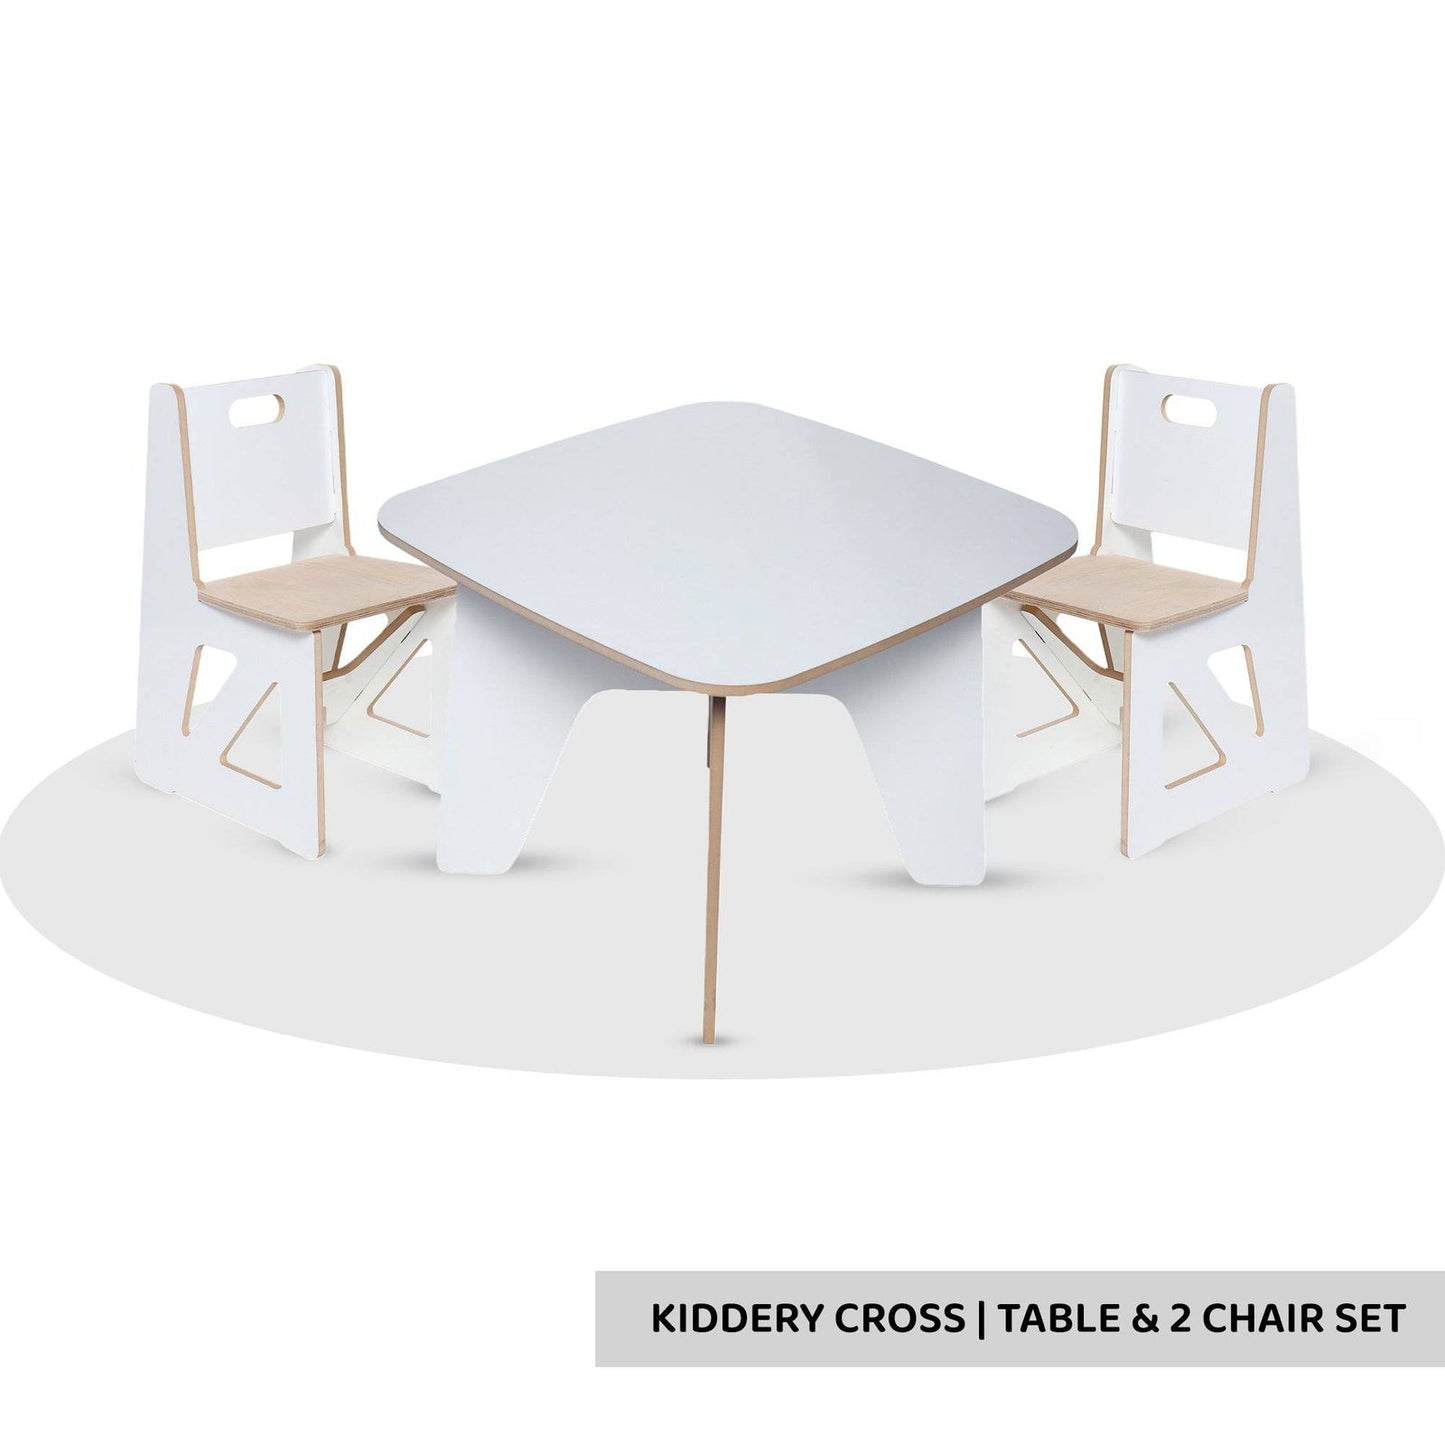 Cross Table with 2 Chair